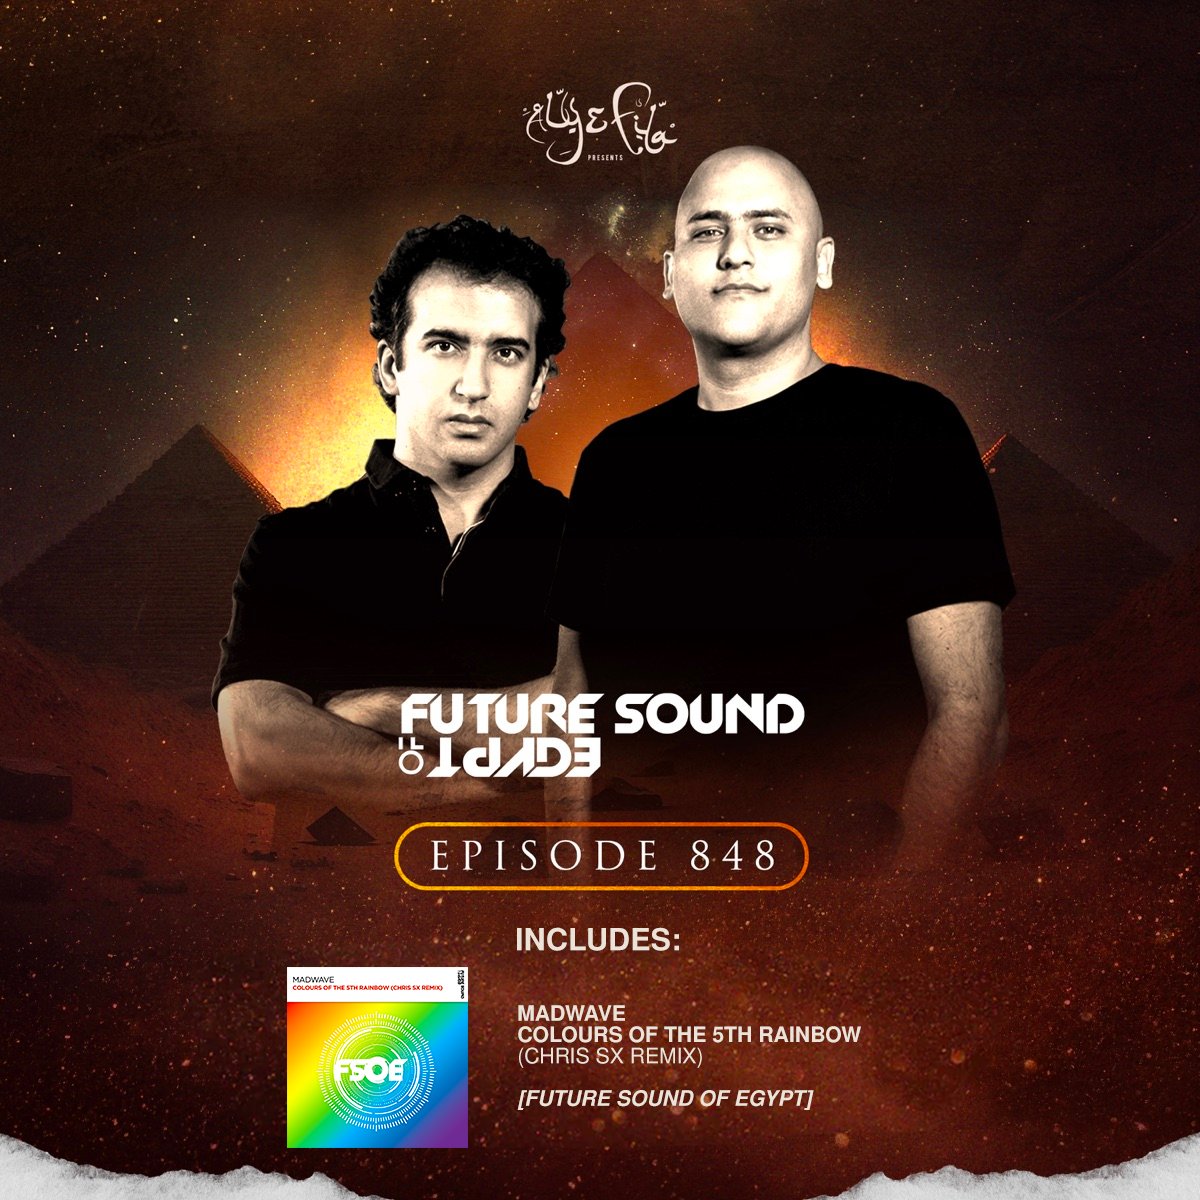 Set for release next Monday on @FsoeRecordings, 'Colours Of The 5th Rainbow' remixed by @ChrisSxofficial was played last night by @alyandfila on their #FSOE Radio Show. Massive thanks 🙌🏻 You can pre-save/pre-order here: fsoe.streamlink.to/coloursofthe5t…